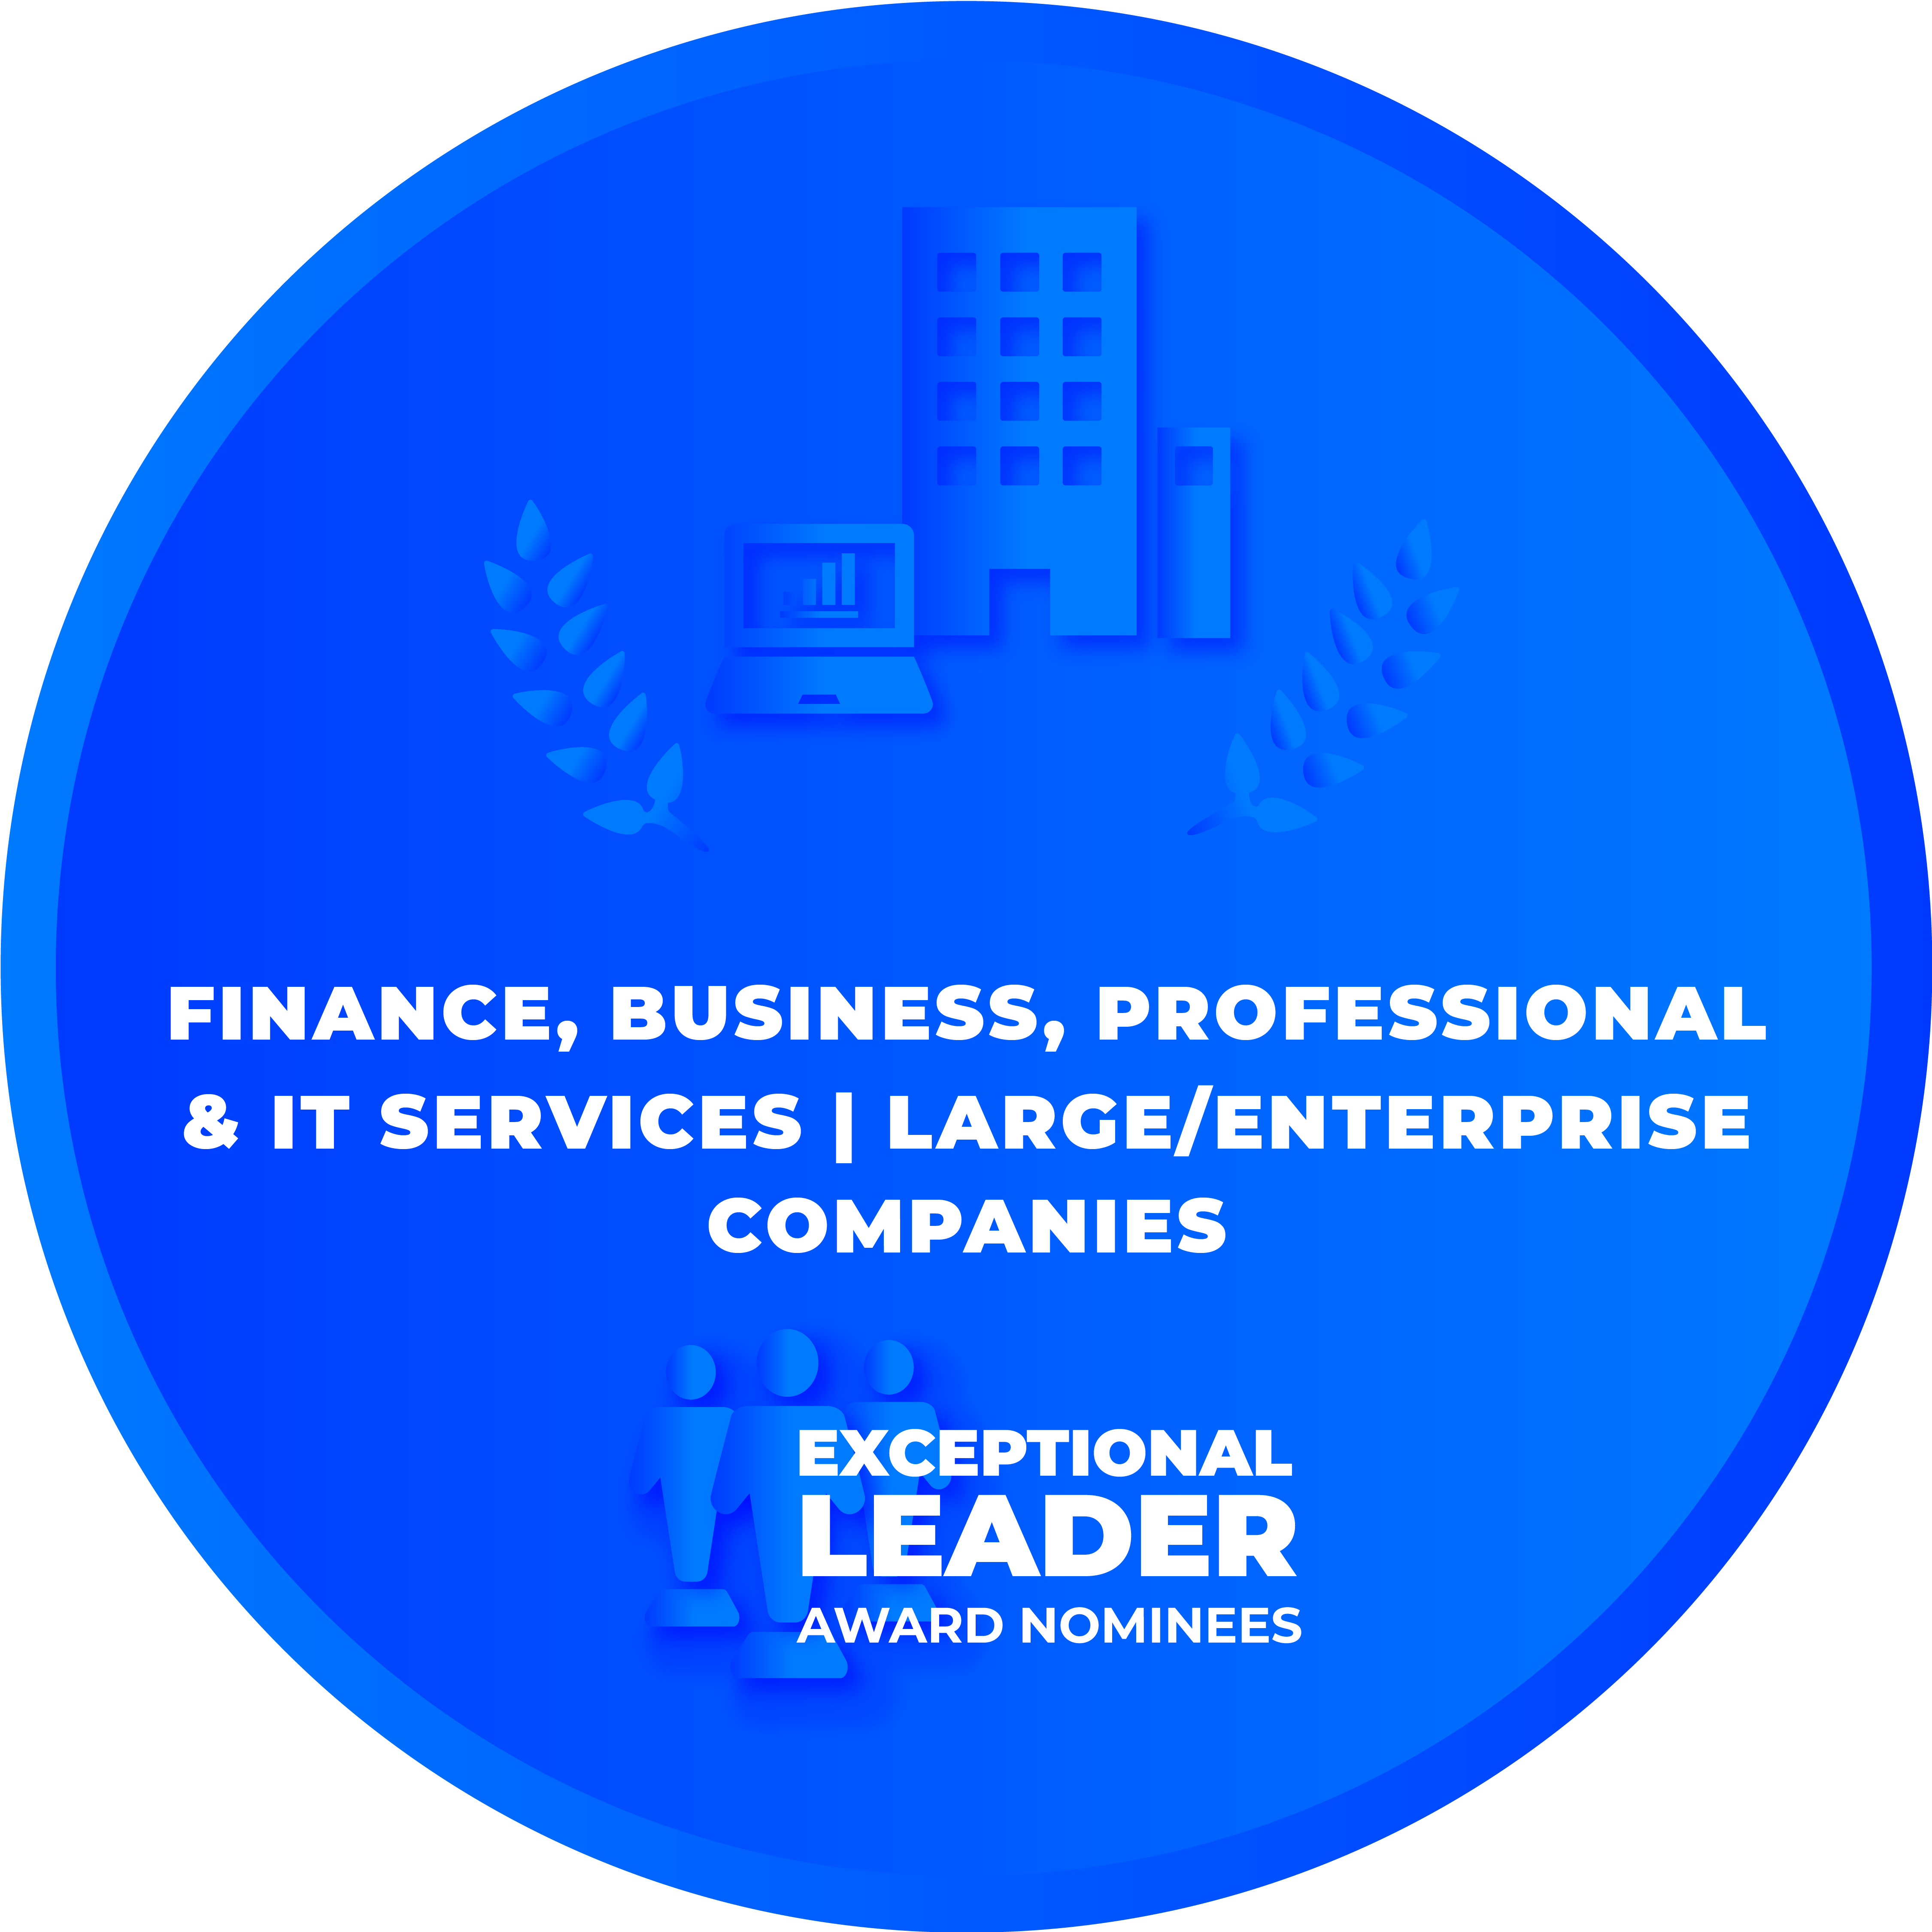 CRCA 2022 - EXCEPTIONAL LEADER AWARDS - Finance Business Professional IT Services Large Enterprise Companies